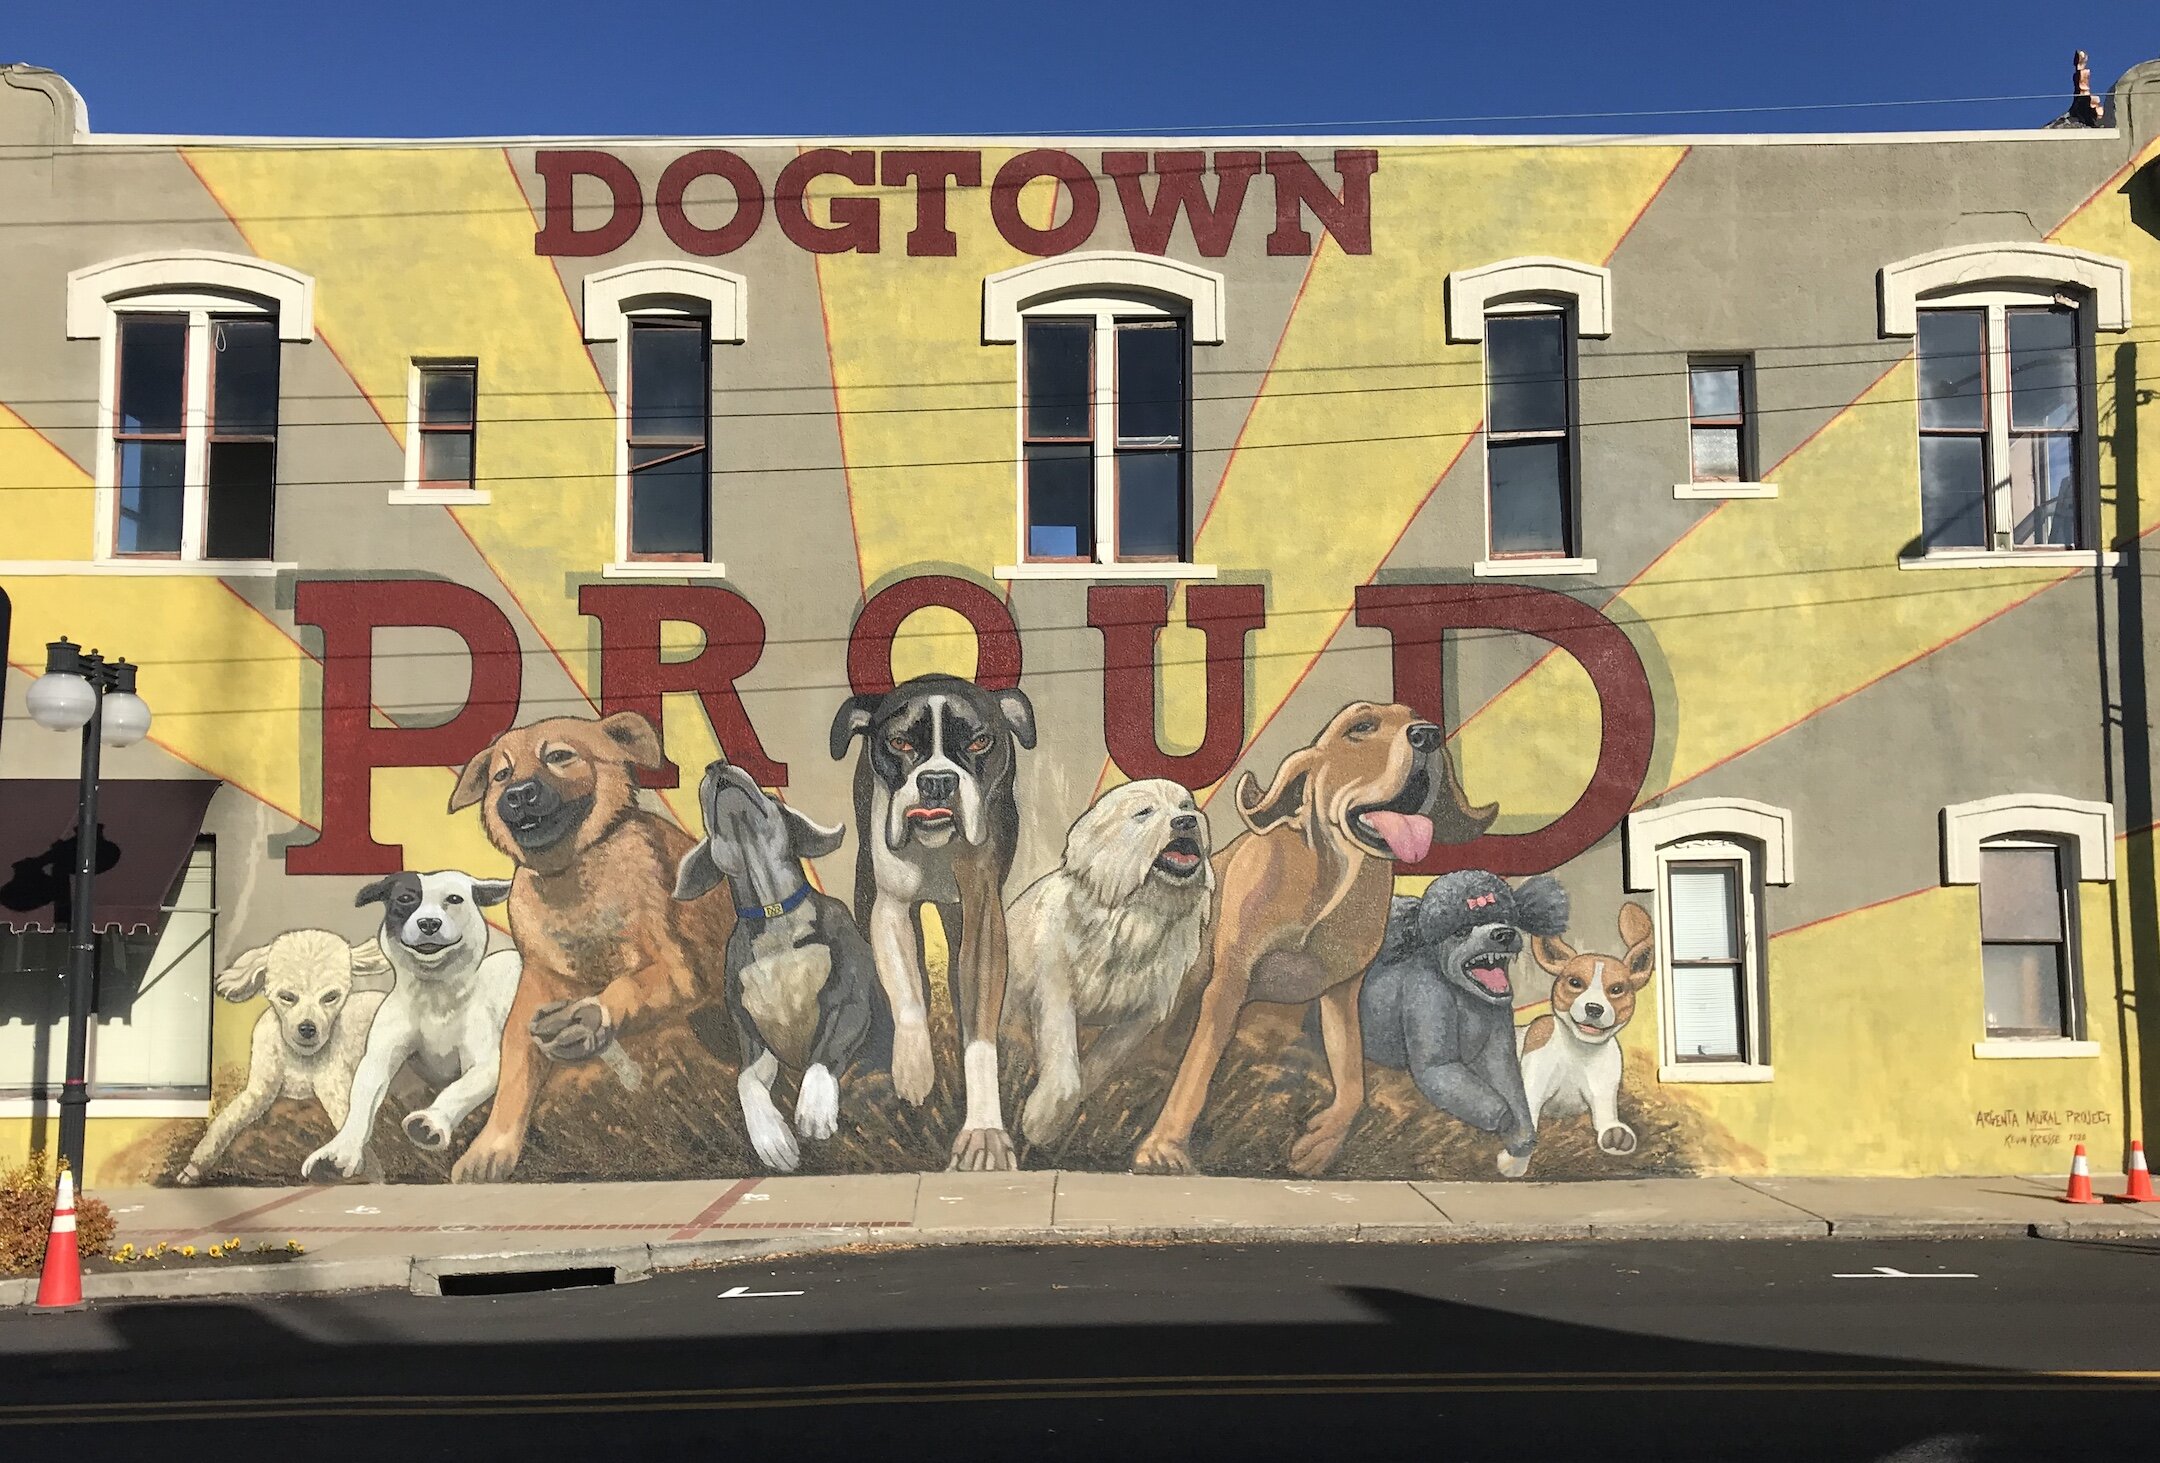    Dogtown Proud  , 4th St. and Main in North Little Rock, mural by Kevin Kresse 